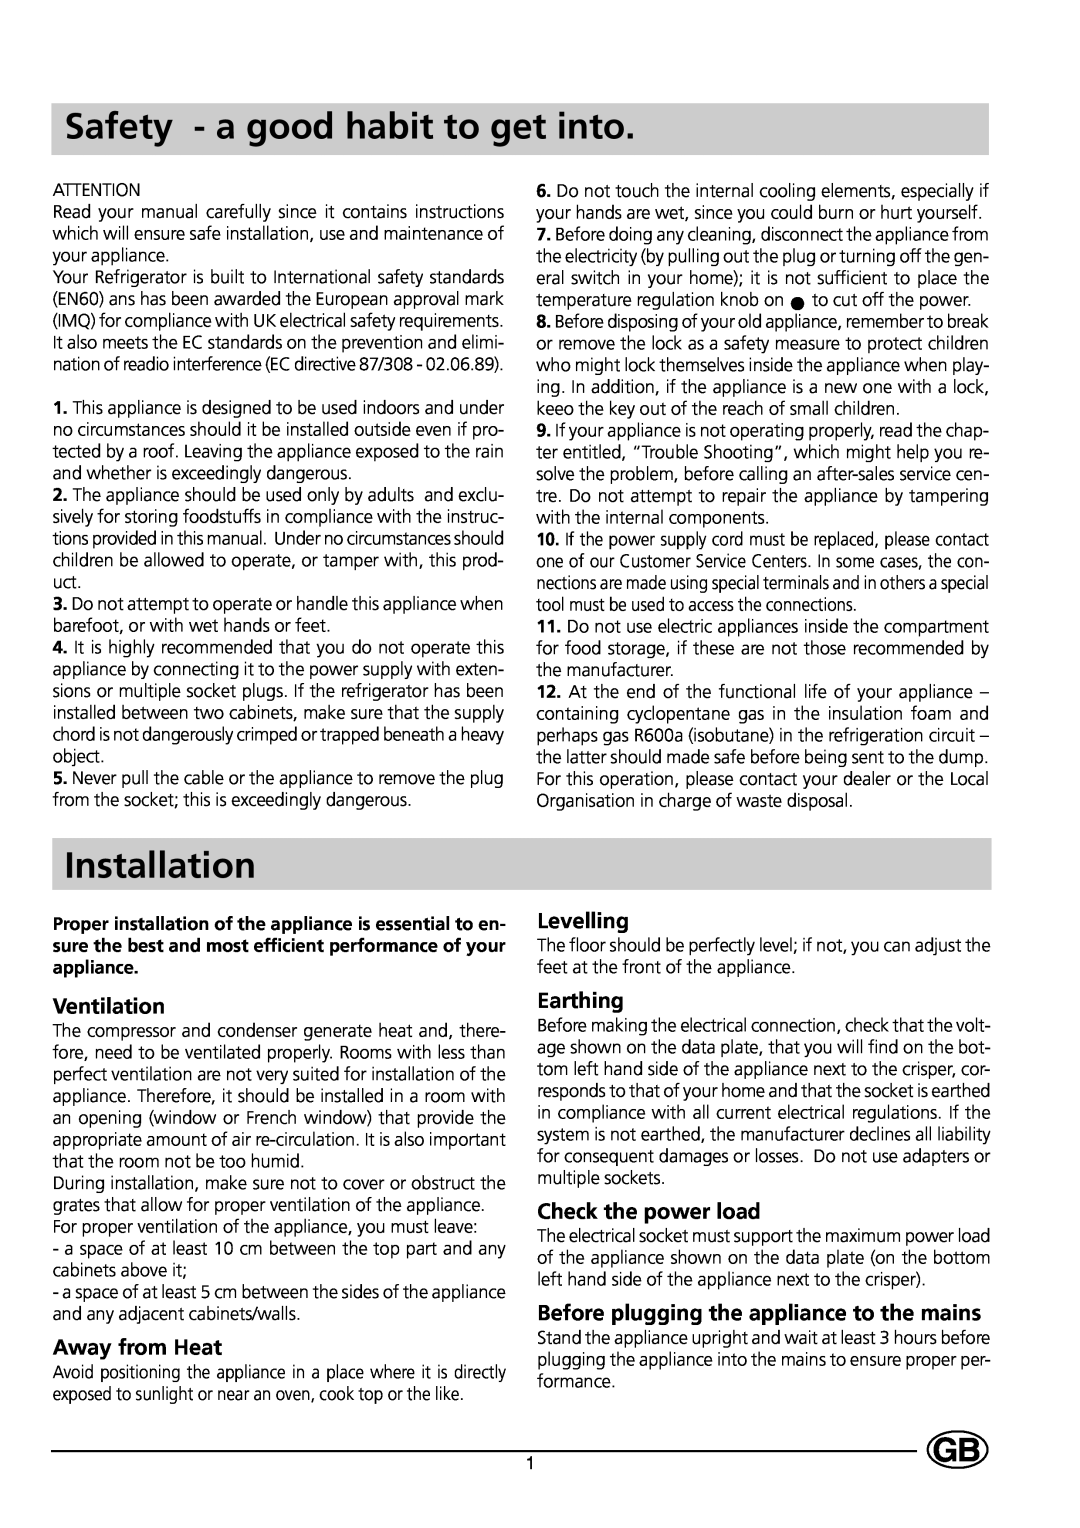 Indesit C 133 UK manual Safety - a good habit to get into, Installation, Ventilation, Away from Heat, Levelling, Earthing 